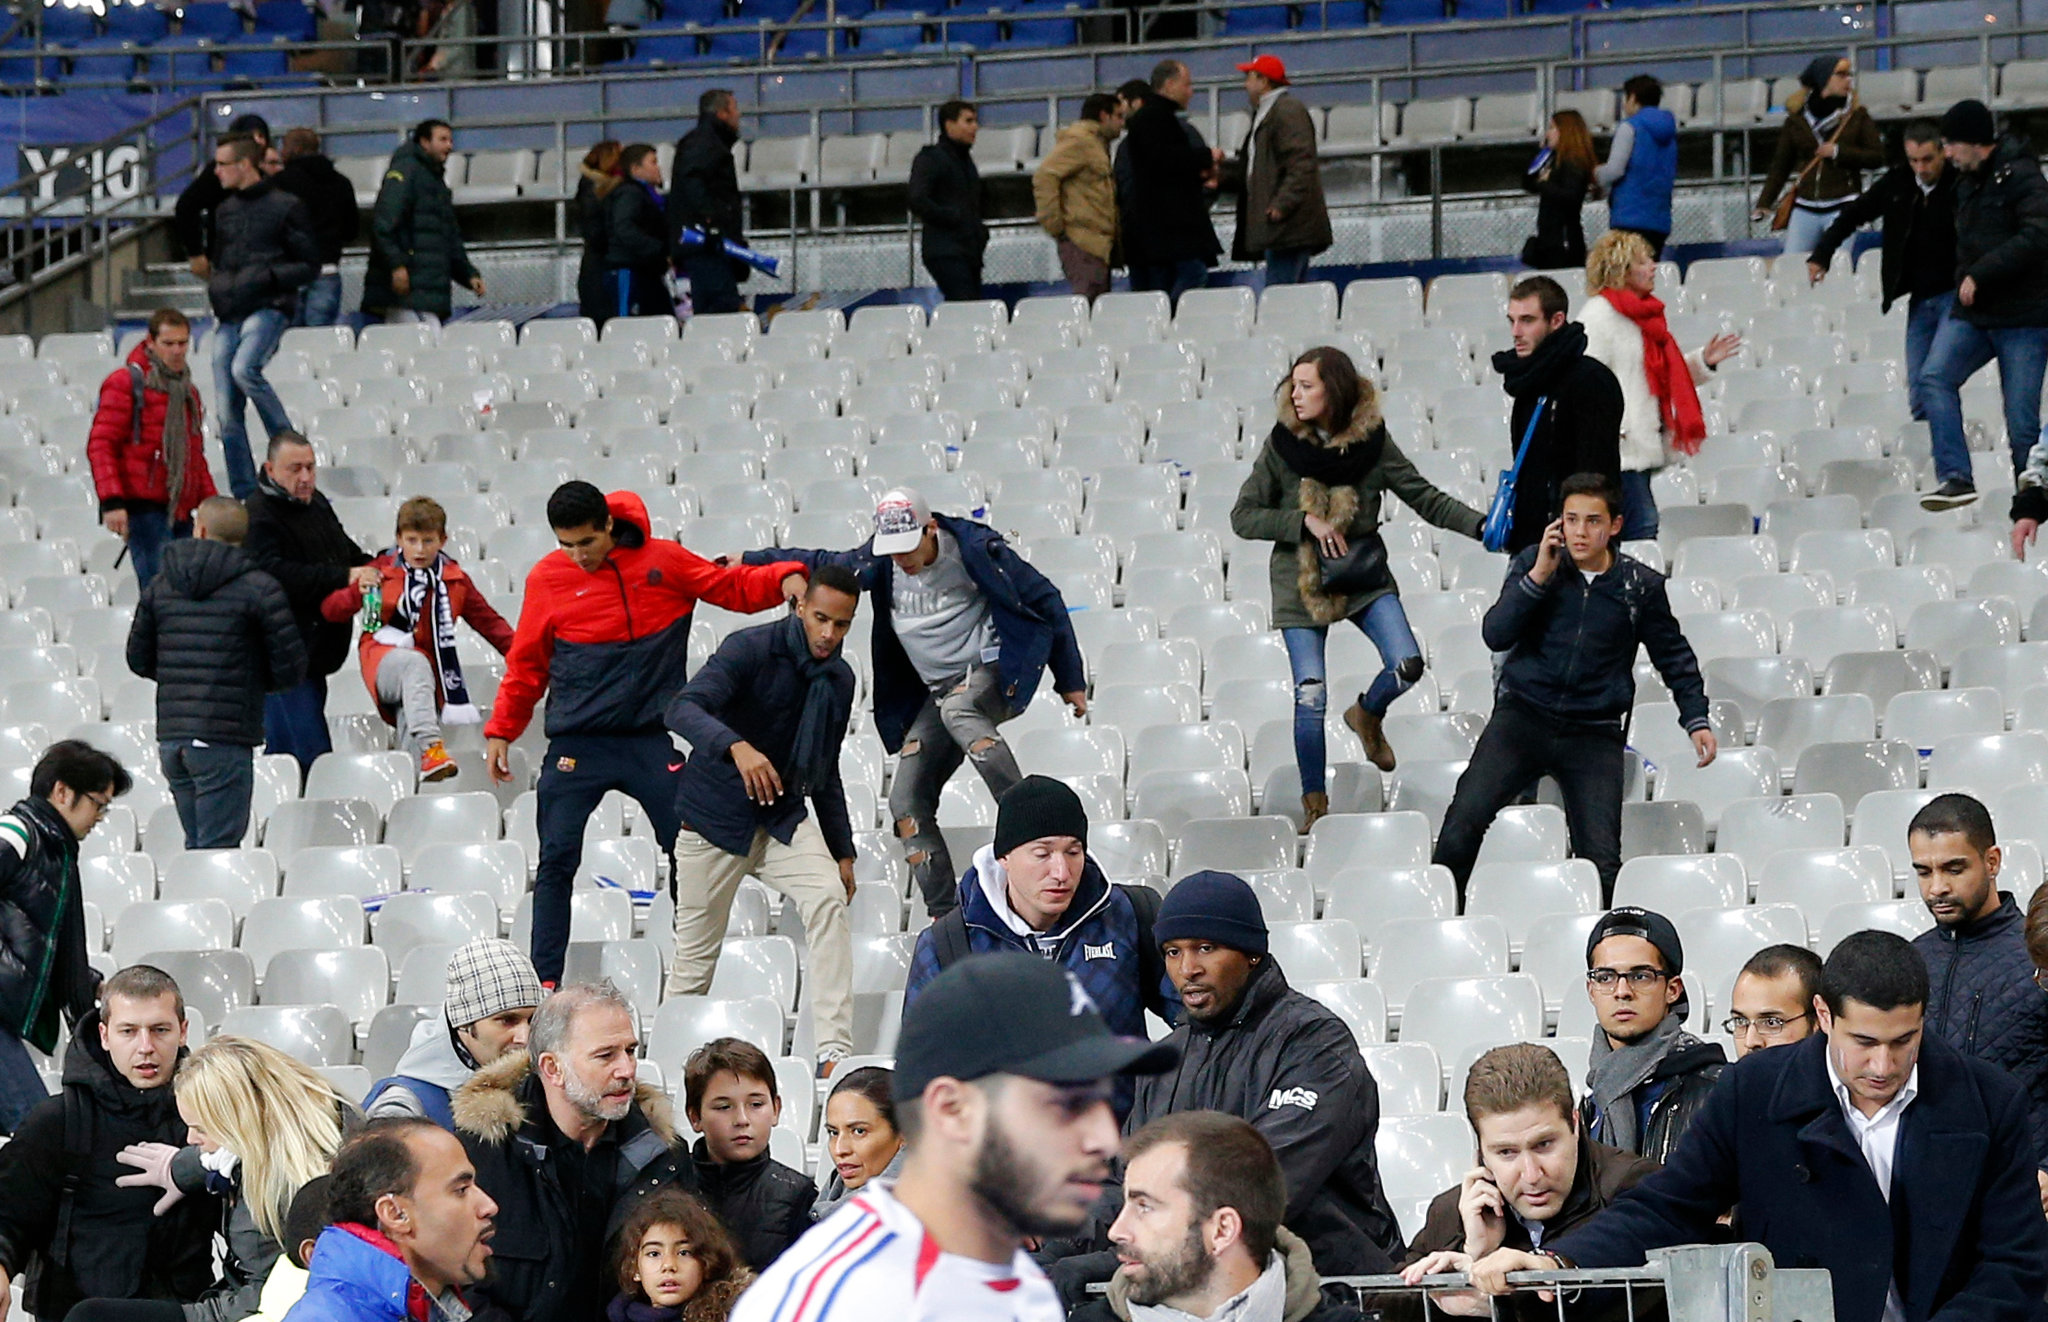 A Man Was Shot Dead During a Football Match in France